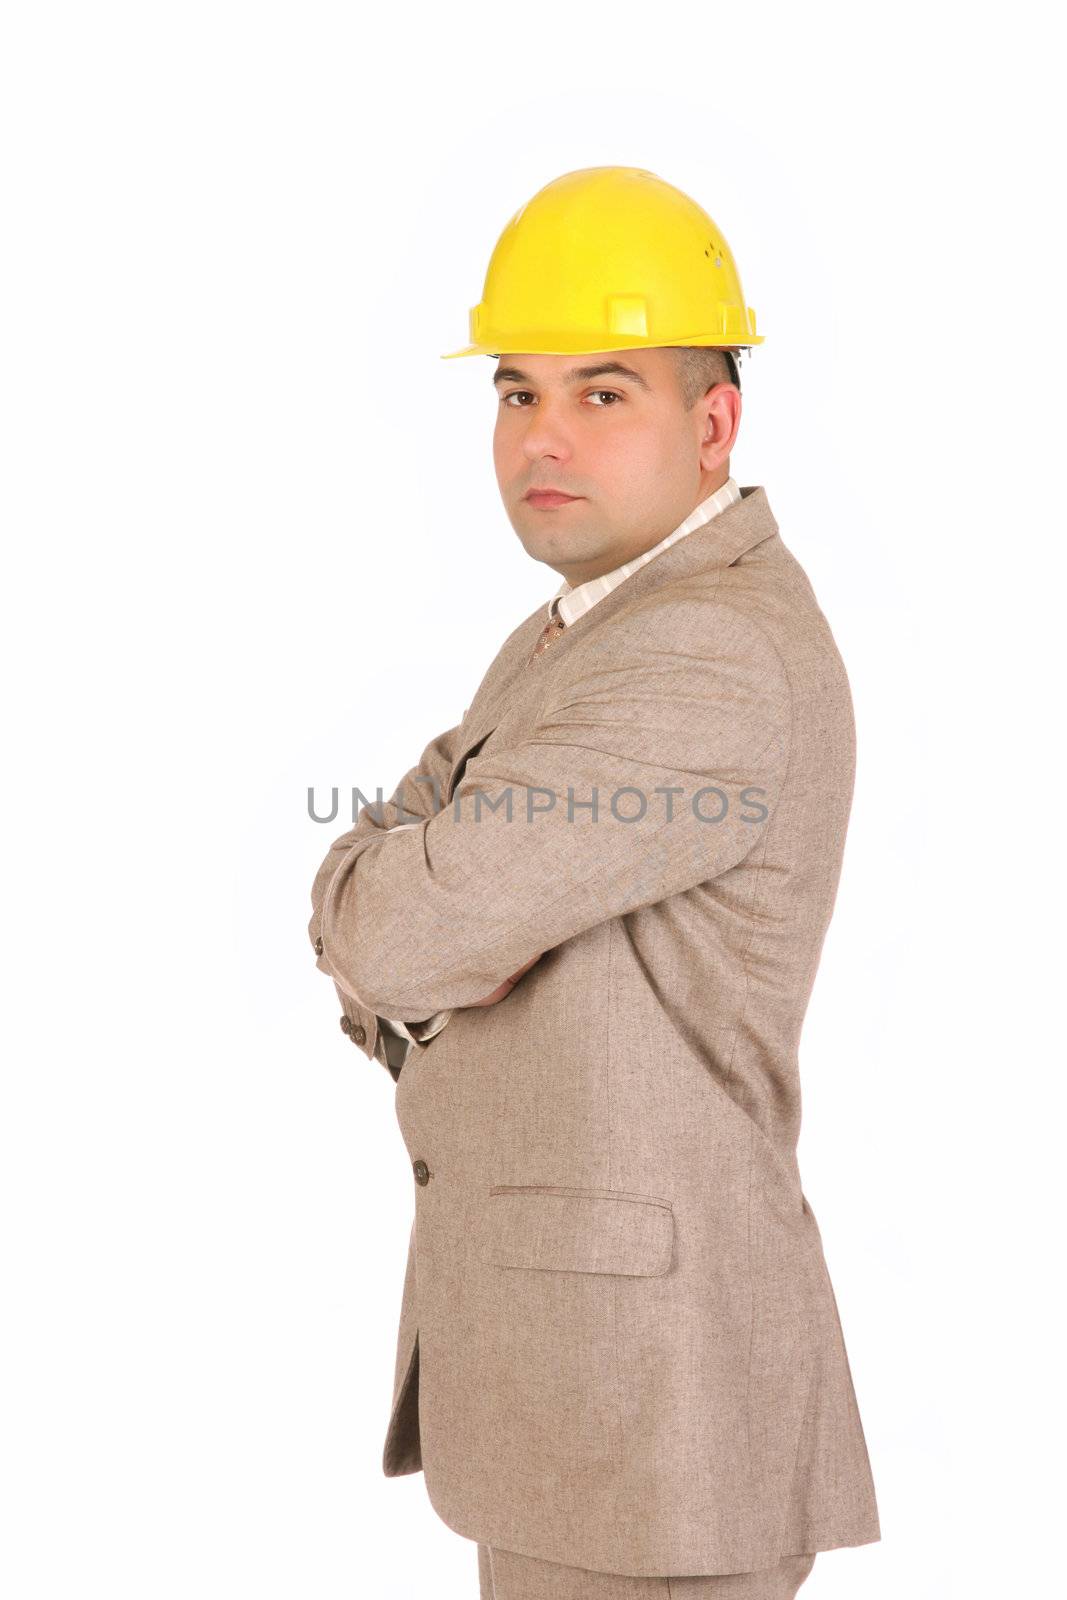 A Businessman looking on white background